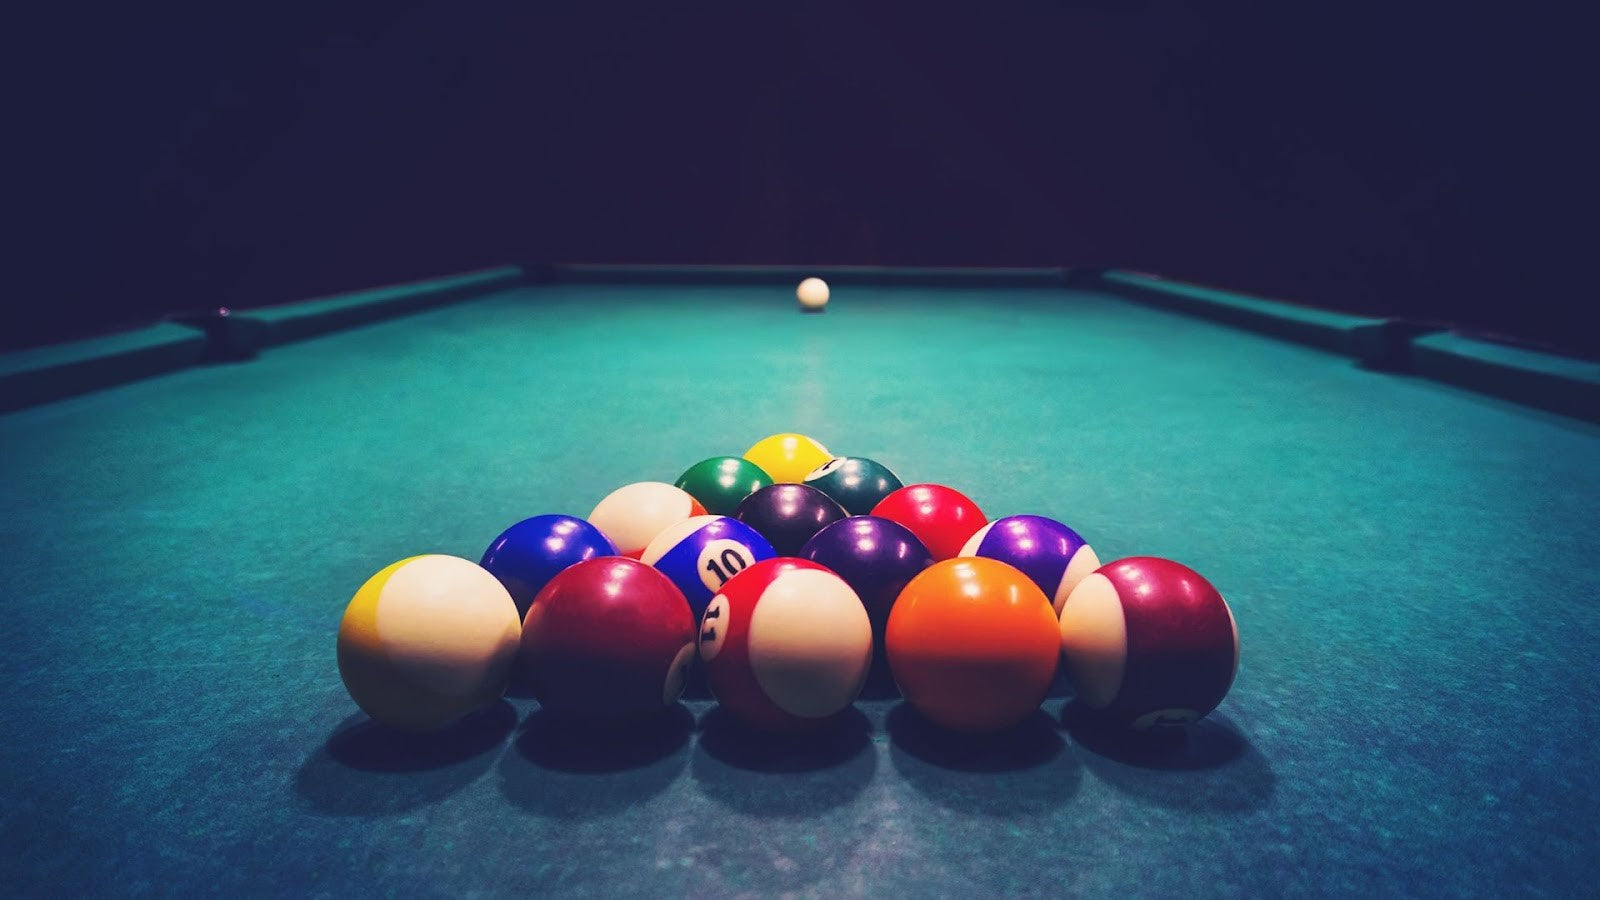 Is Snooker The Same As Pool?